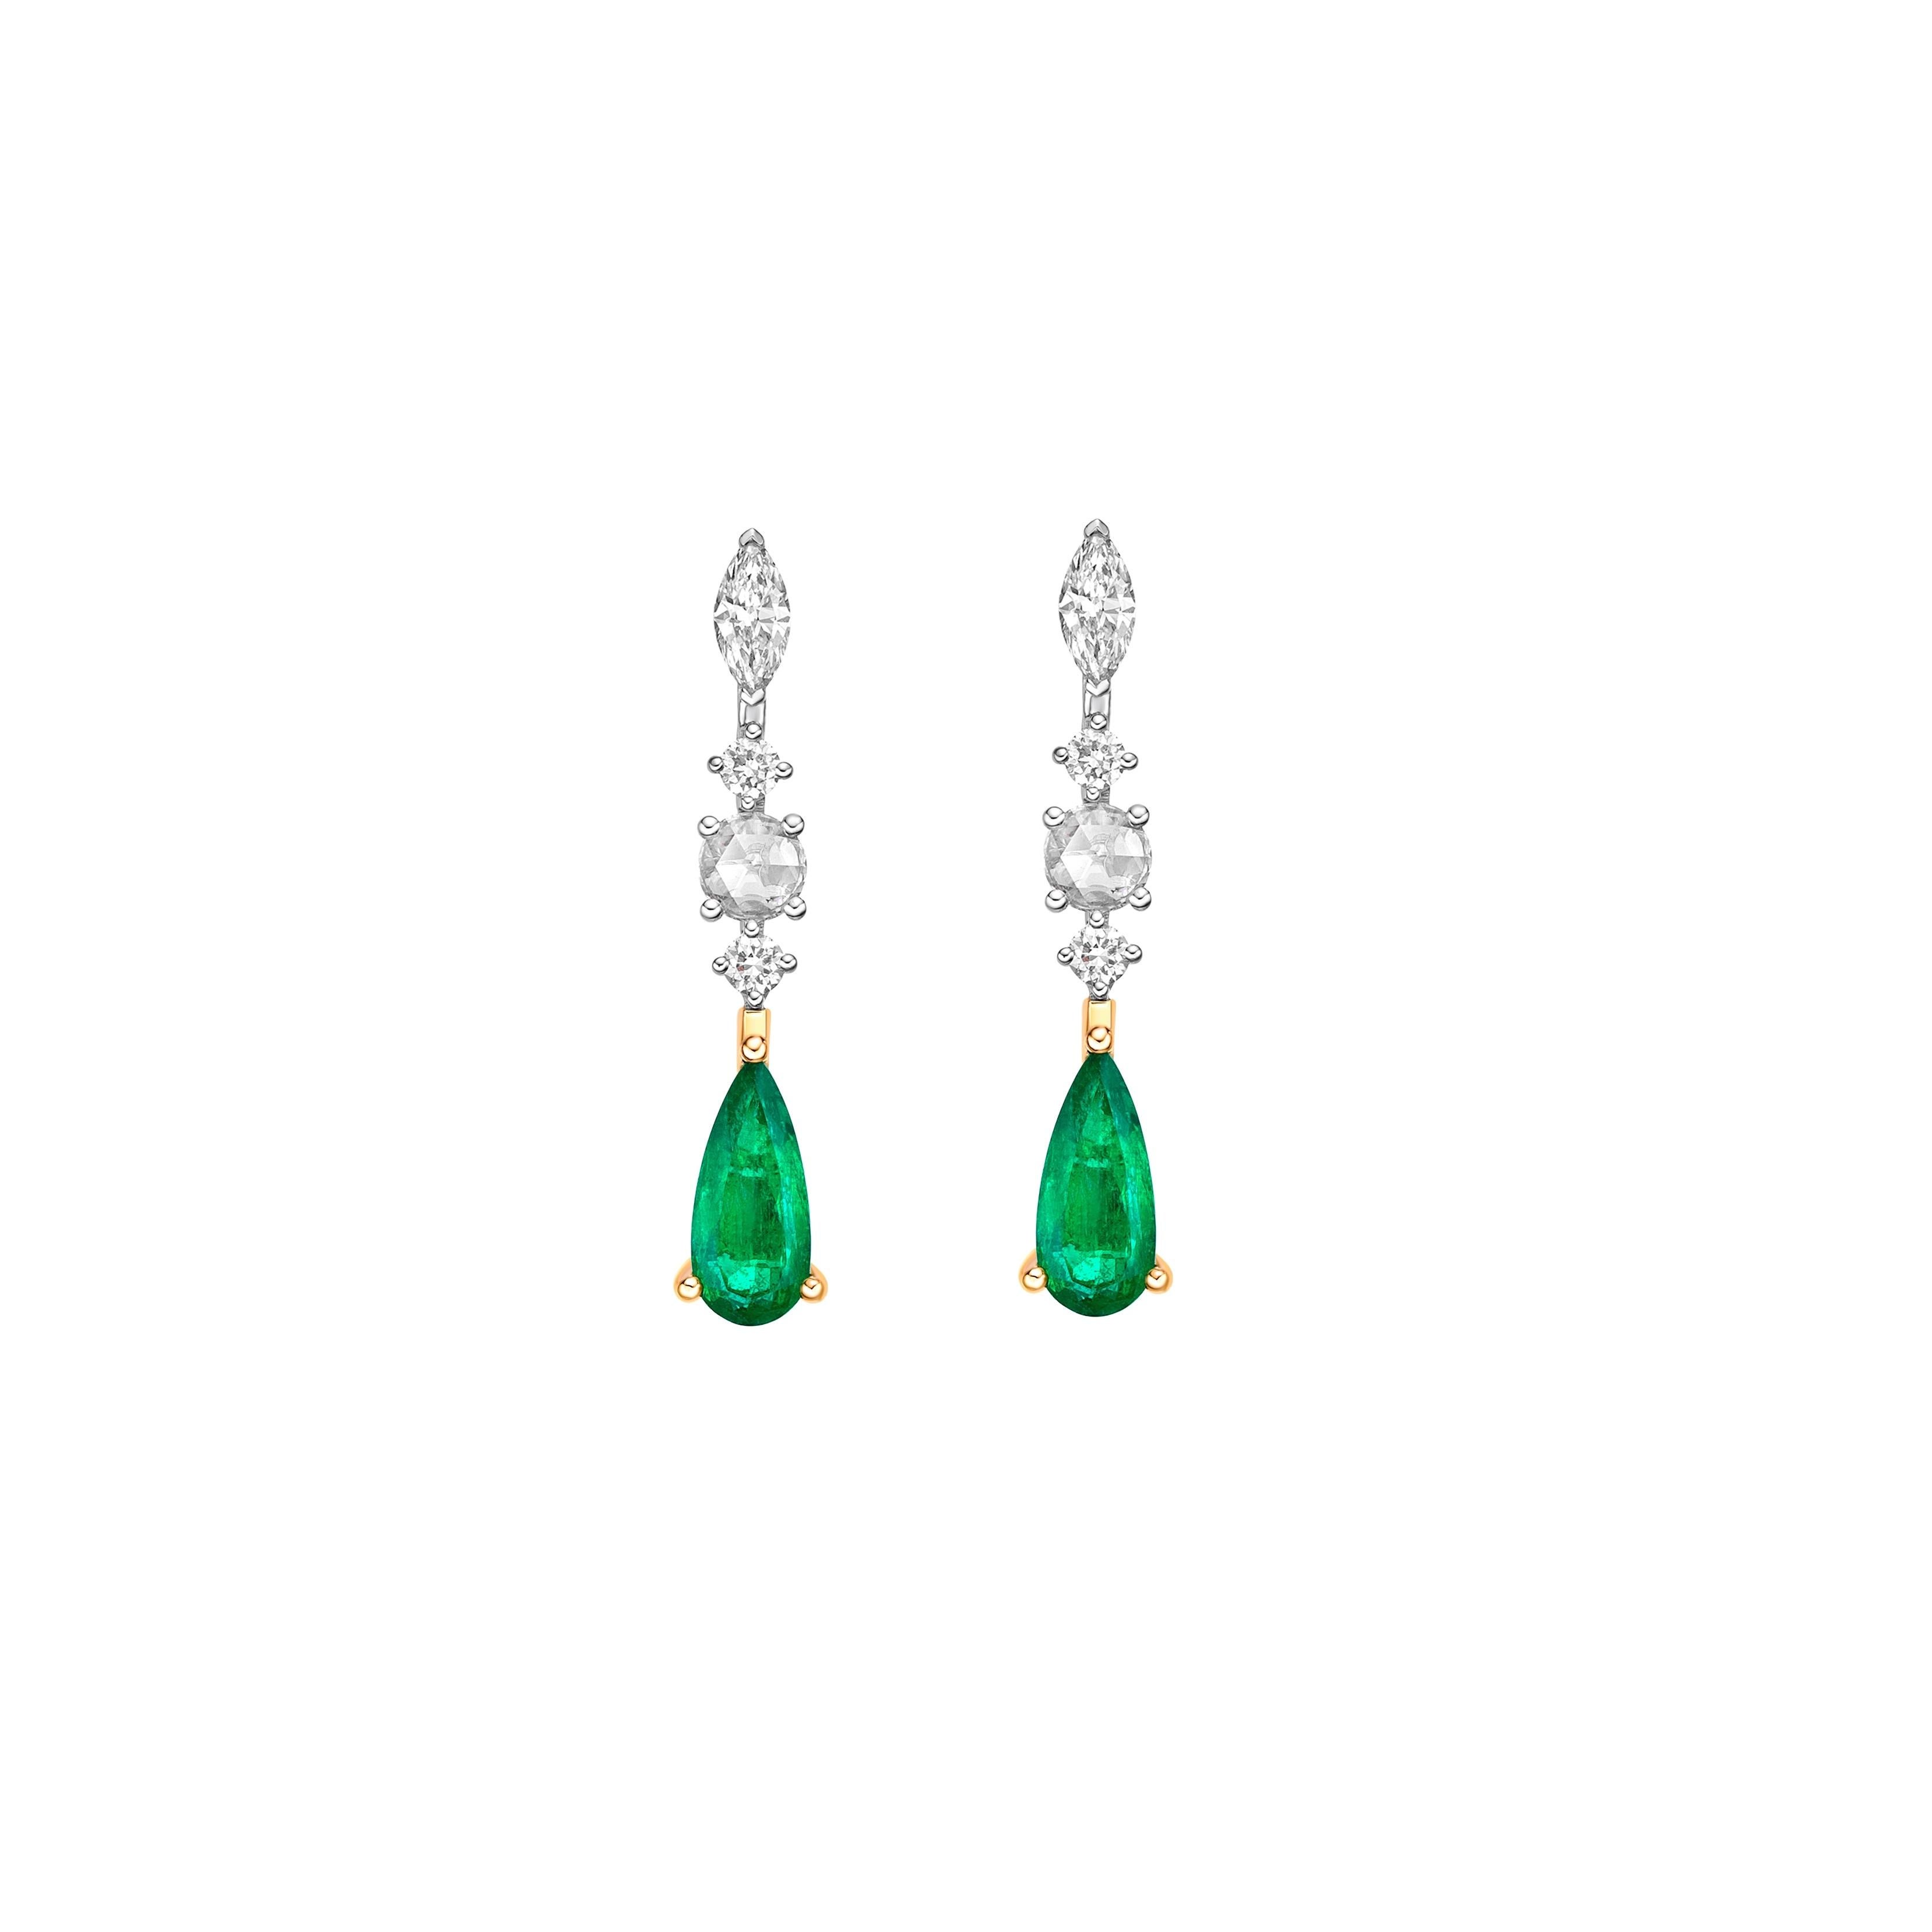 Contemporary 1.64 Carat Emerald Drop Earrings in 18Karat White Yellow Gold with  Diamond. For Sale